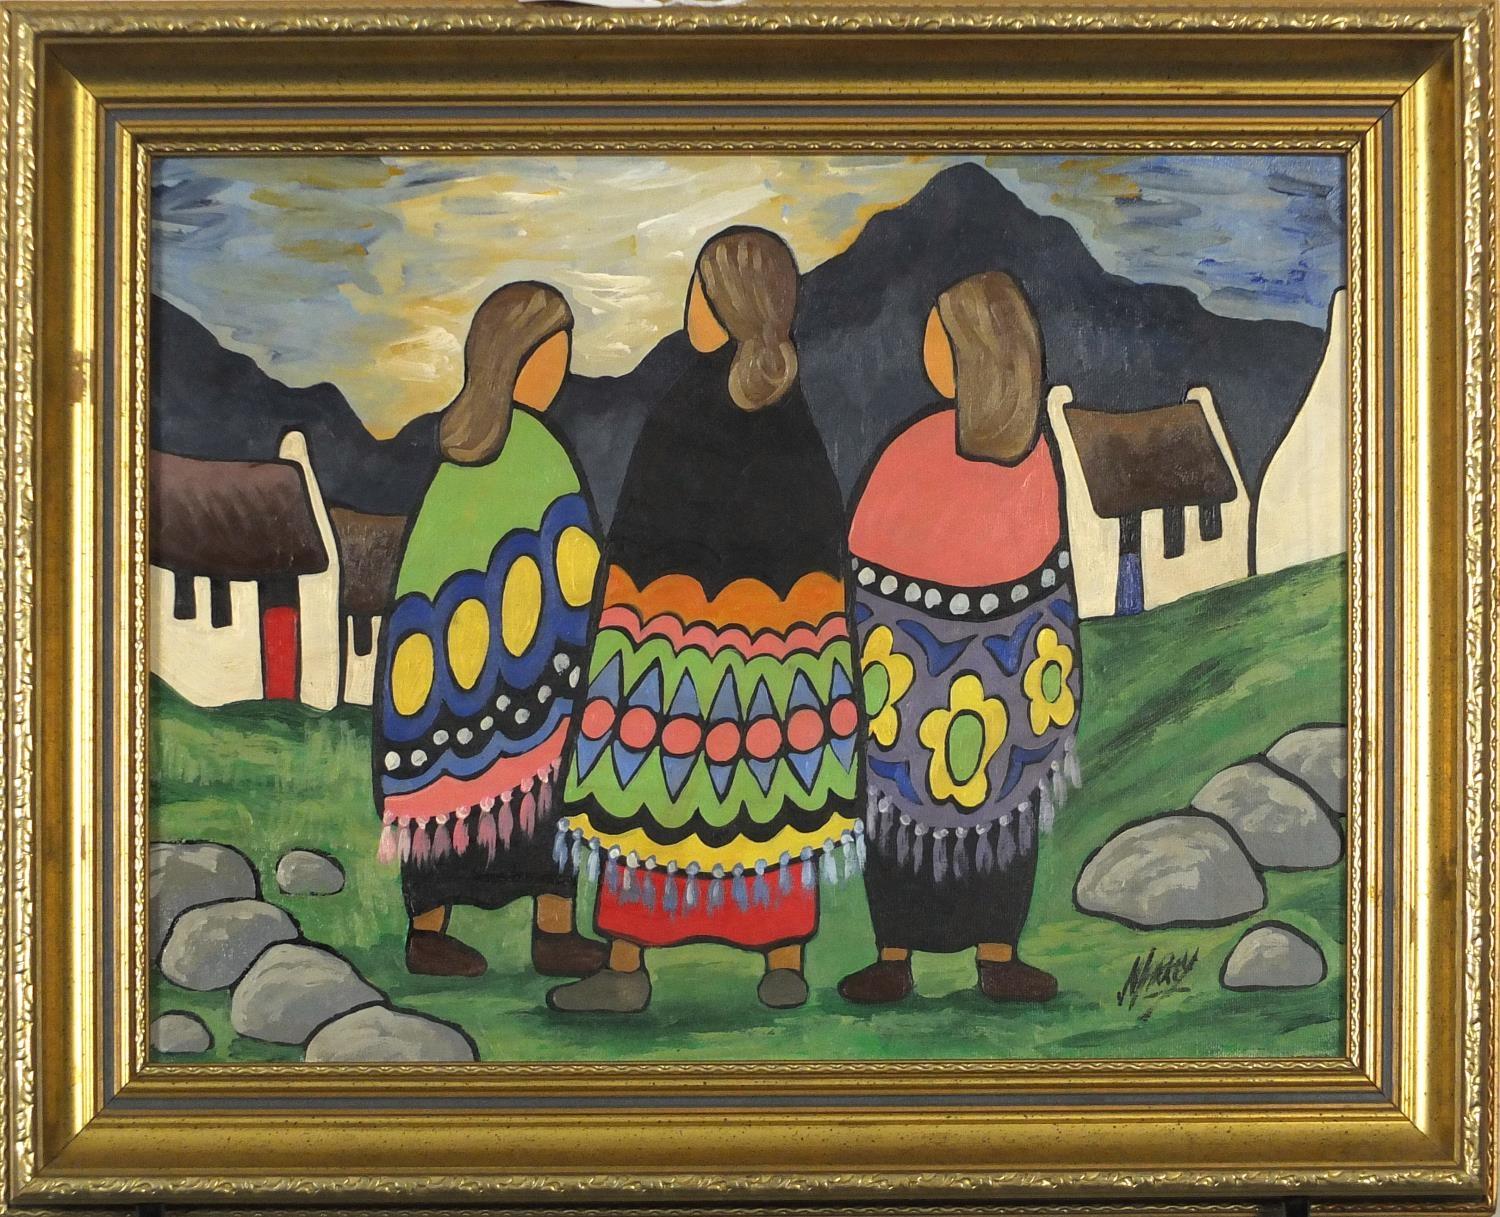 Manner of Markey Robinson - Figures before cottages and mountains, Irish school oil on board, - Image 2 of 4